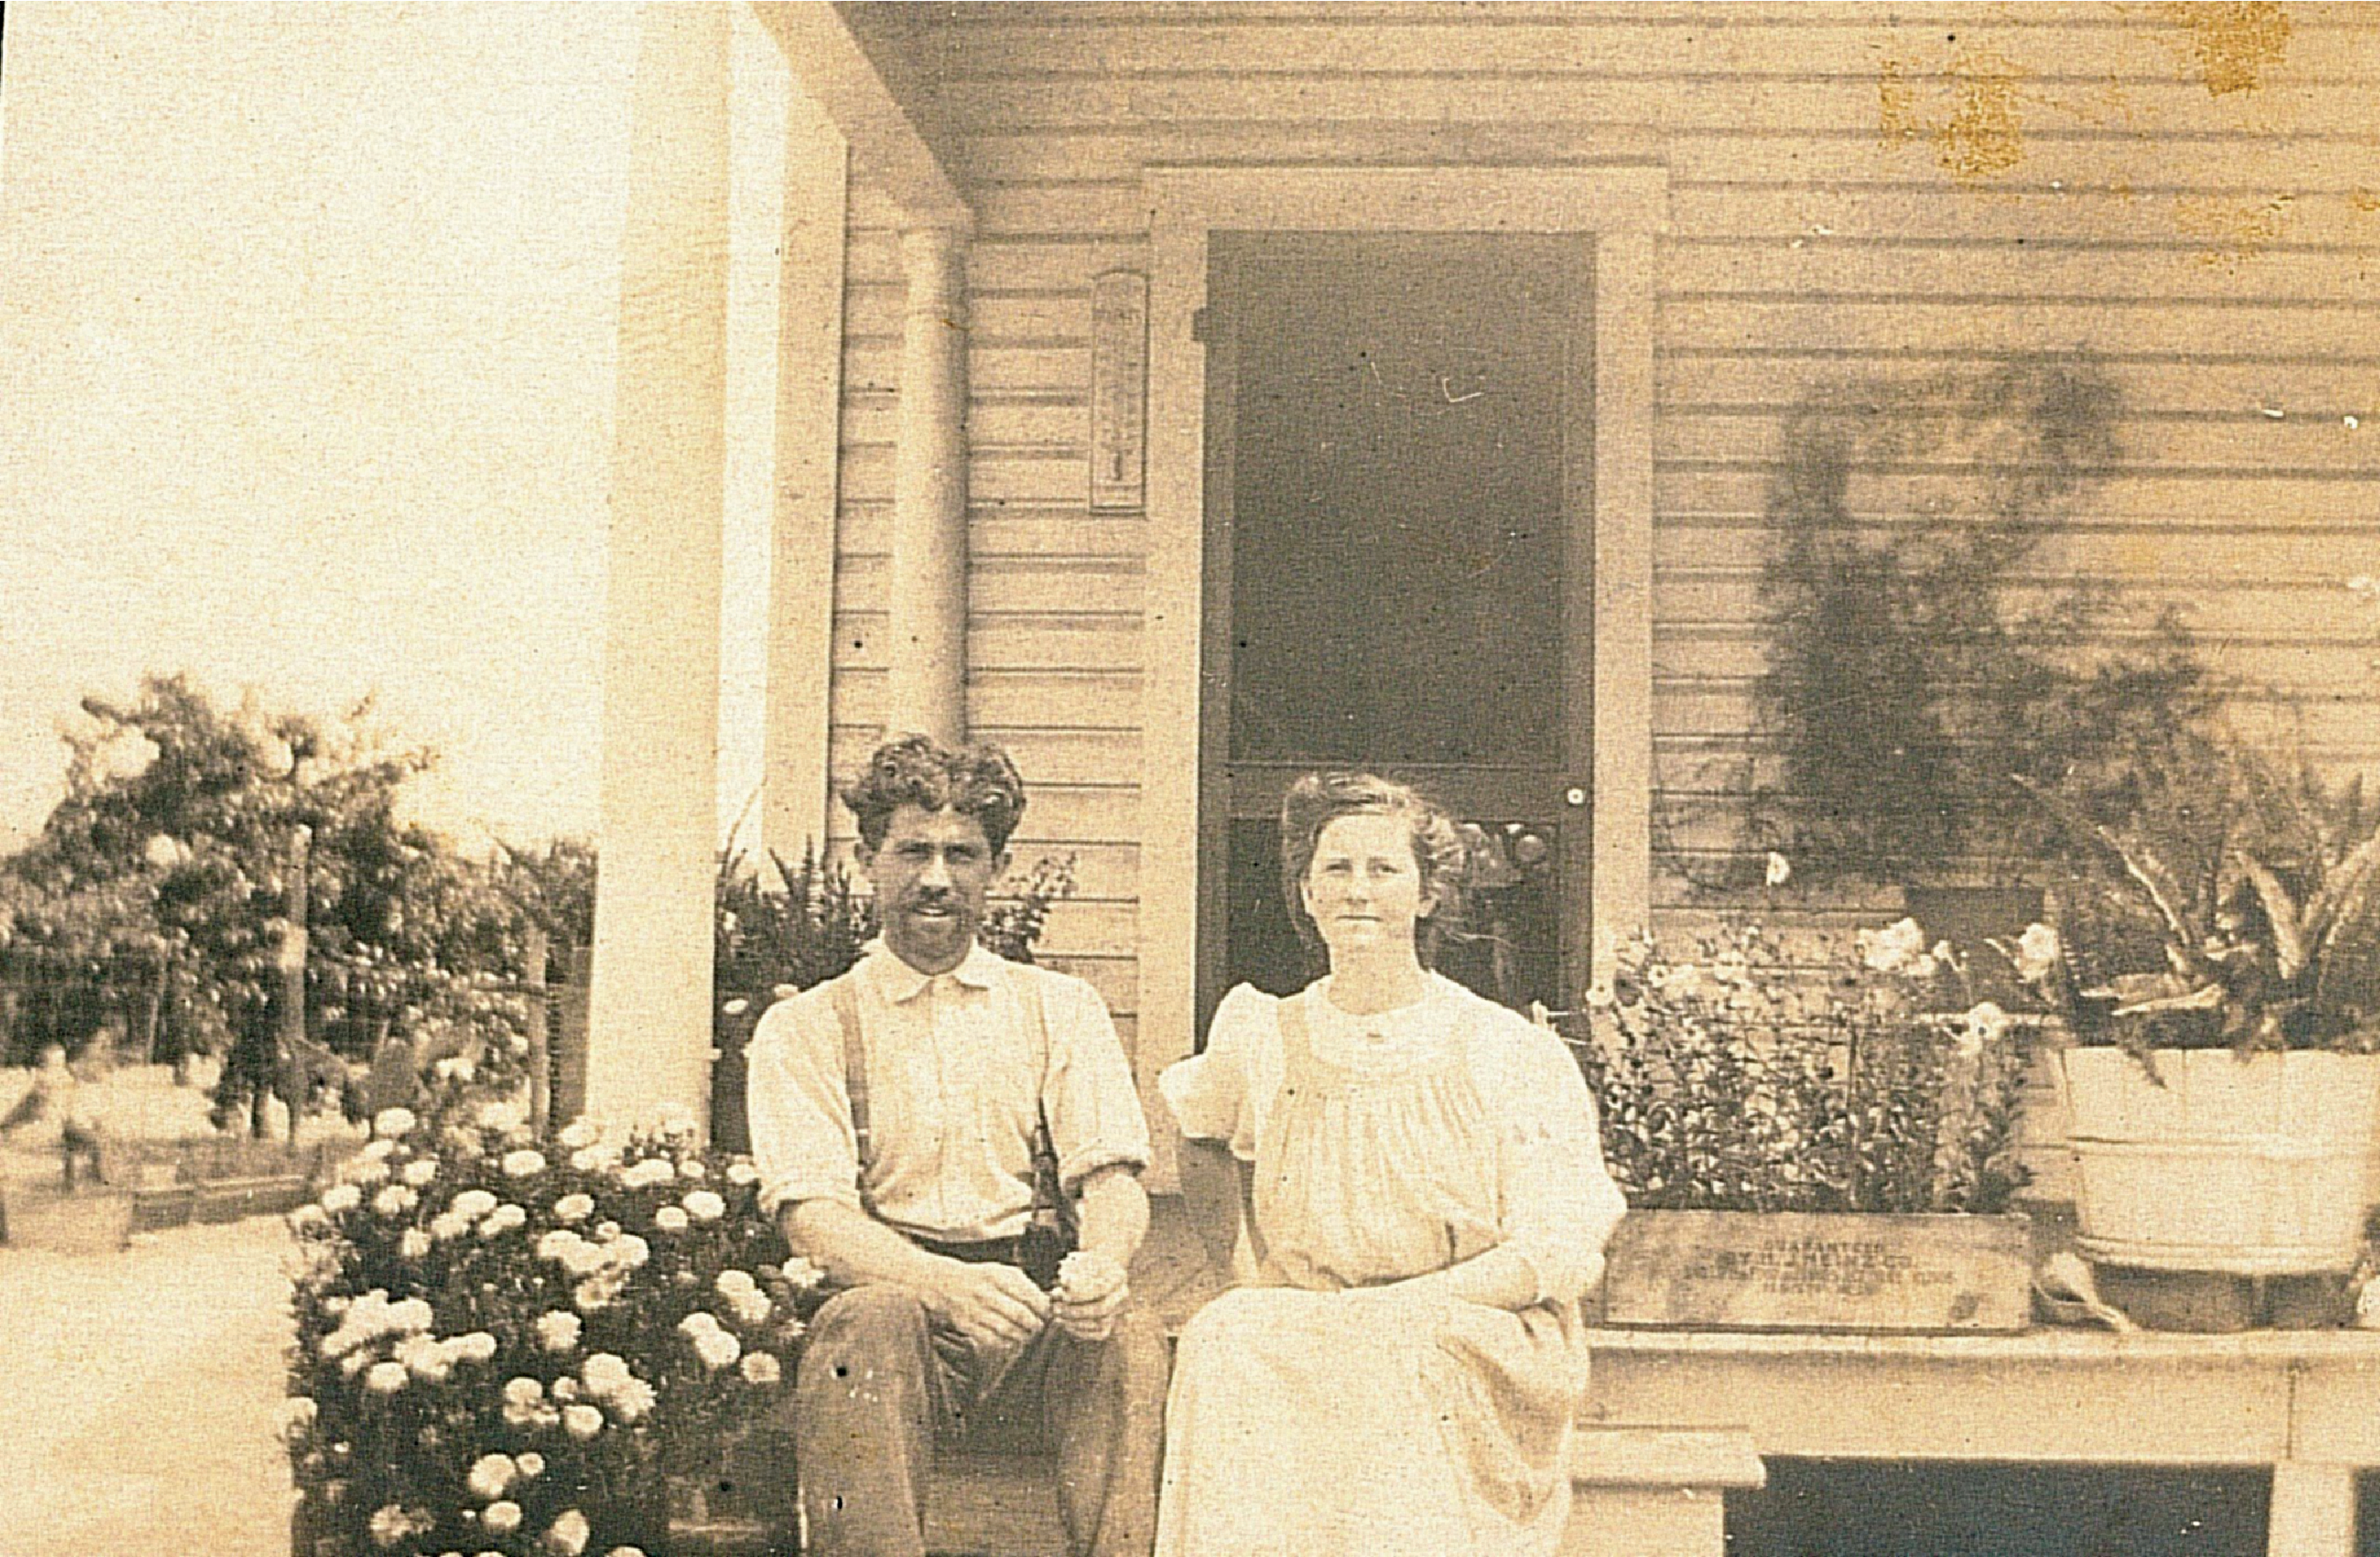 George and Eula Turner on their porch in the early 1900s